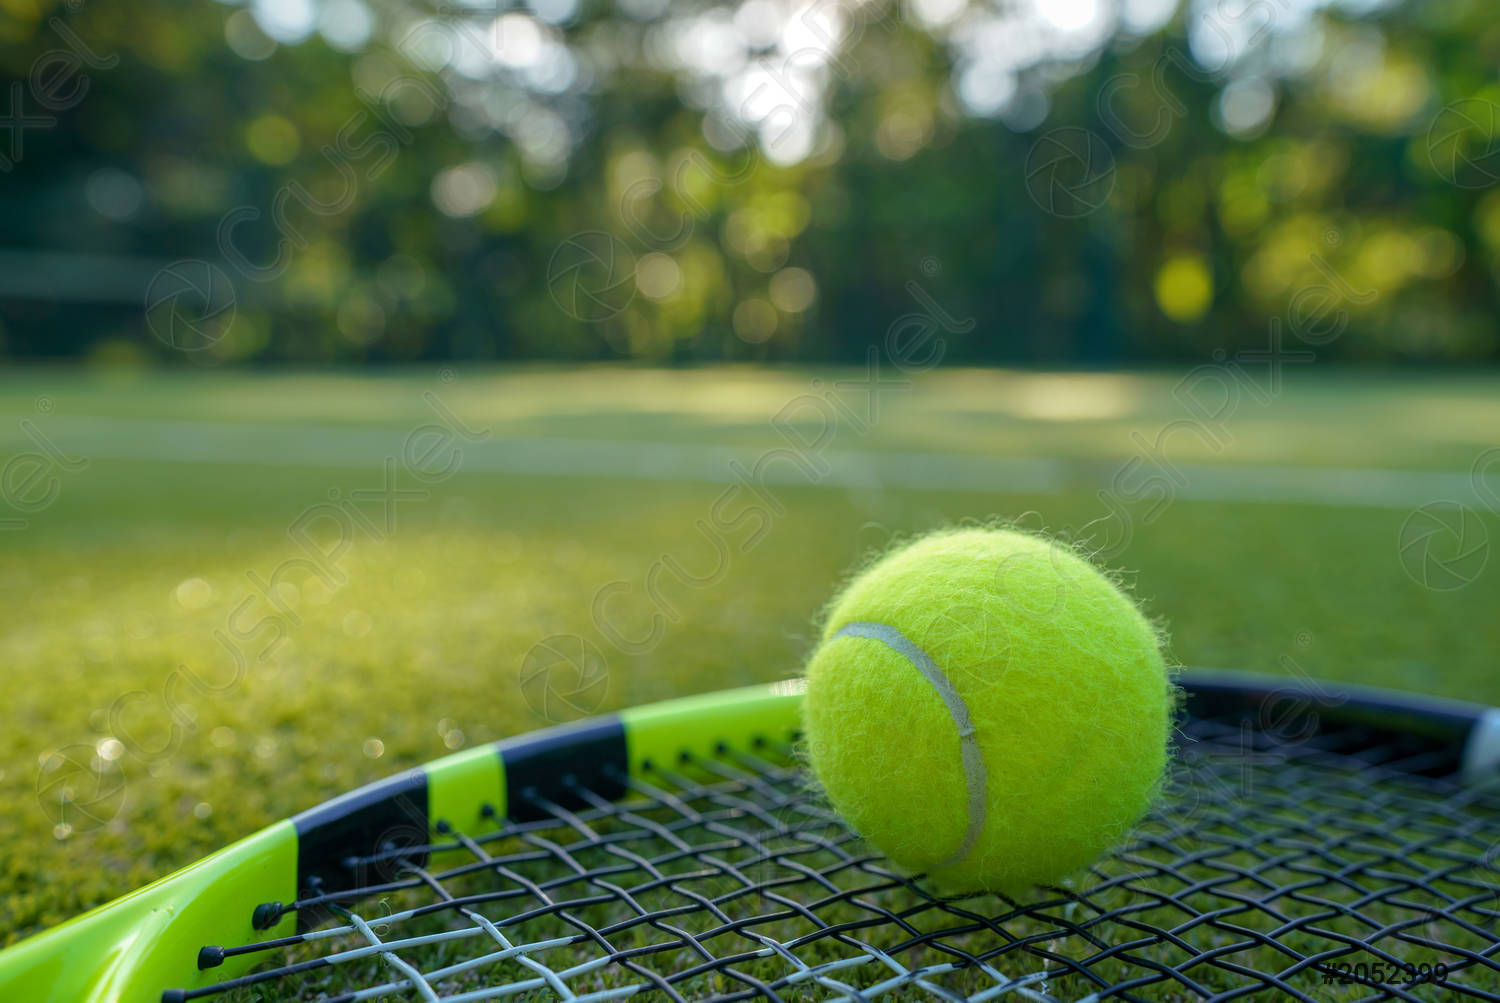 Detail Image Of Tennis Racket And Ball Nomer 40